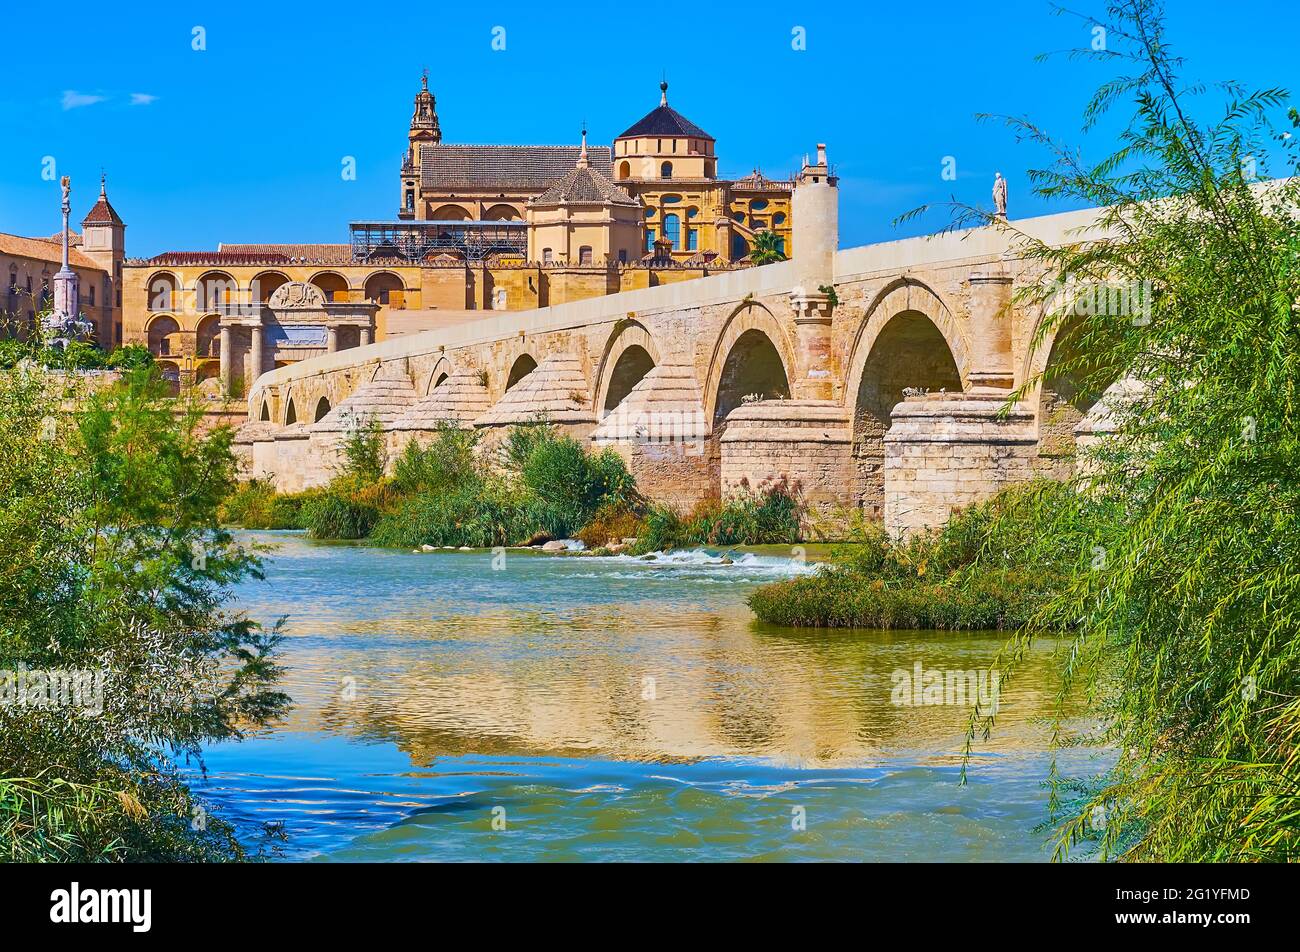 The monumental building of Mezquita-Catedral (Mosque-Cathedral) is seen behind the Guadalquivir River and the Roman Bridge, Cordoba, Spain Stock Photo